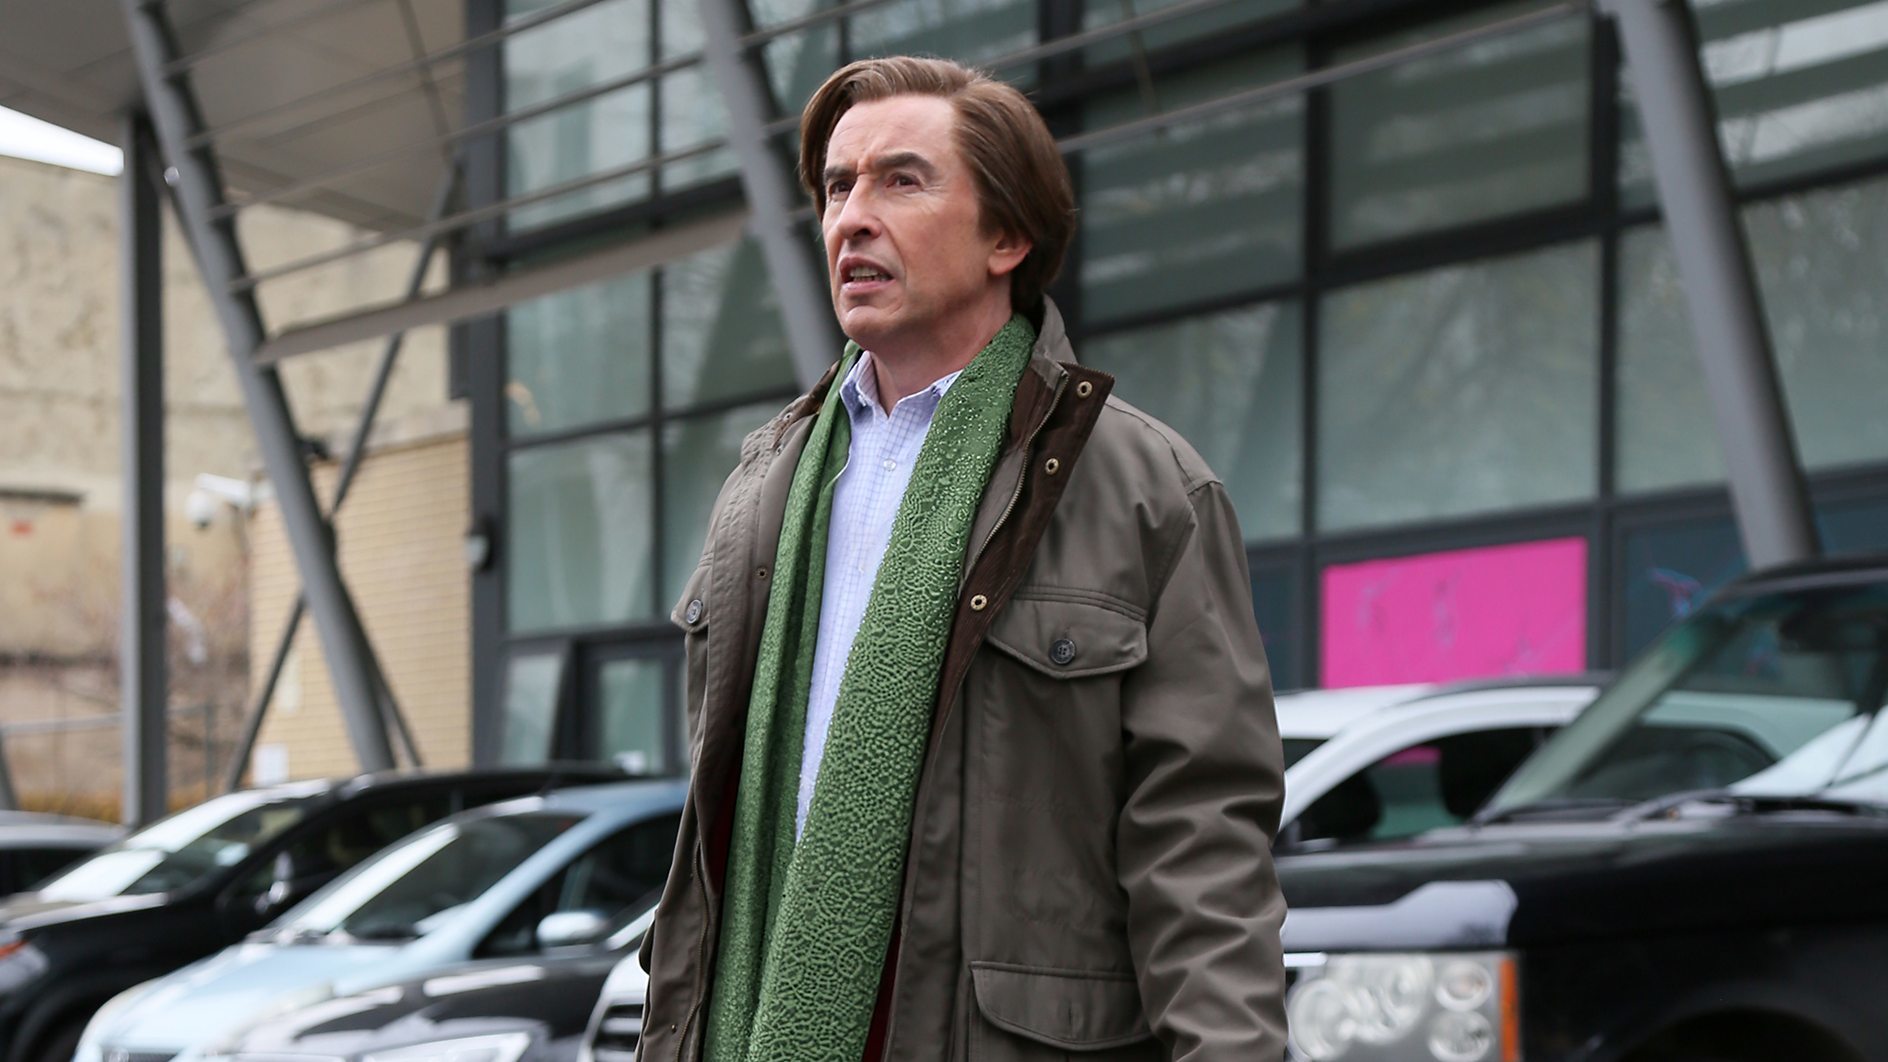 Alan Partridge returns to the UK in a new six-part docu-series.  With Alan Partridge